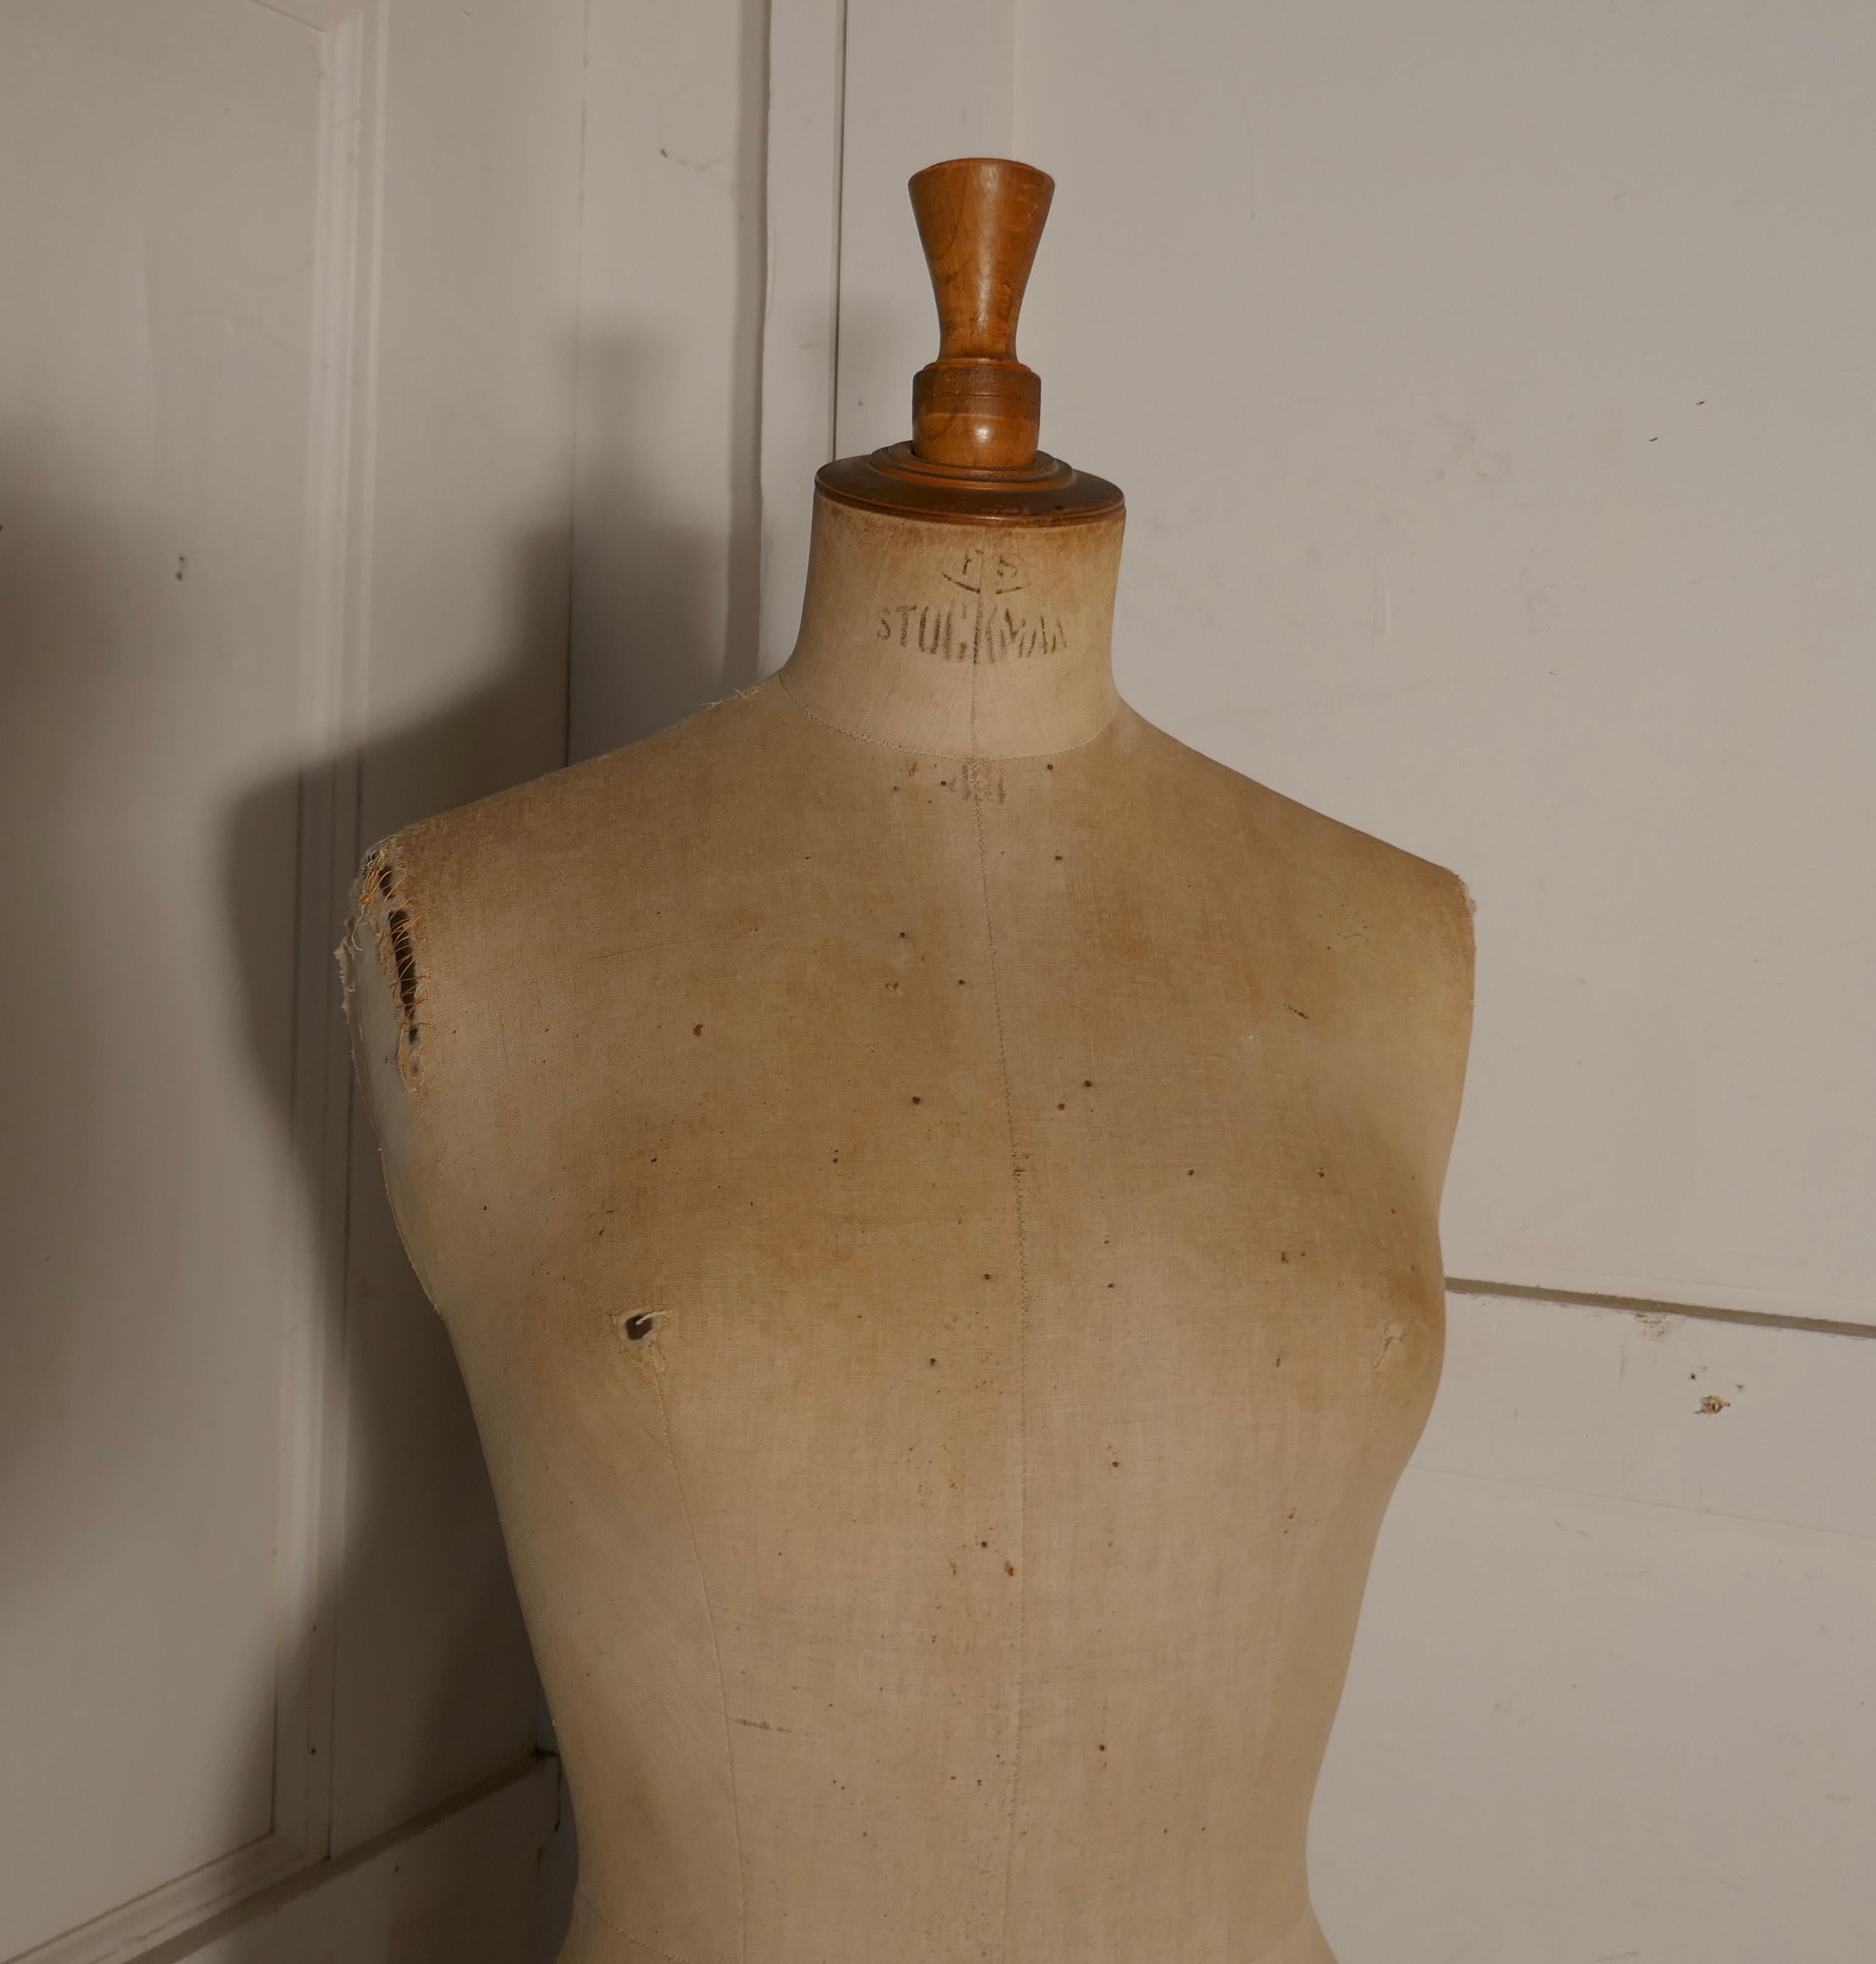 Vintage French Stockman Mannequin, English Size 14

The Mannequin or Tailors Dummy, dates from around 1900 made by  Stockman Paris our mannequin is in original condition, the age darkened linen is in fair condition, there are a few pin holes and one